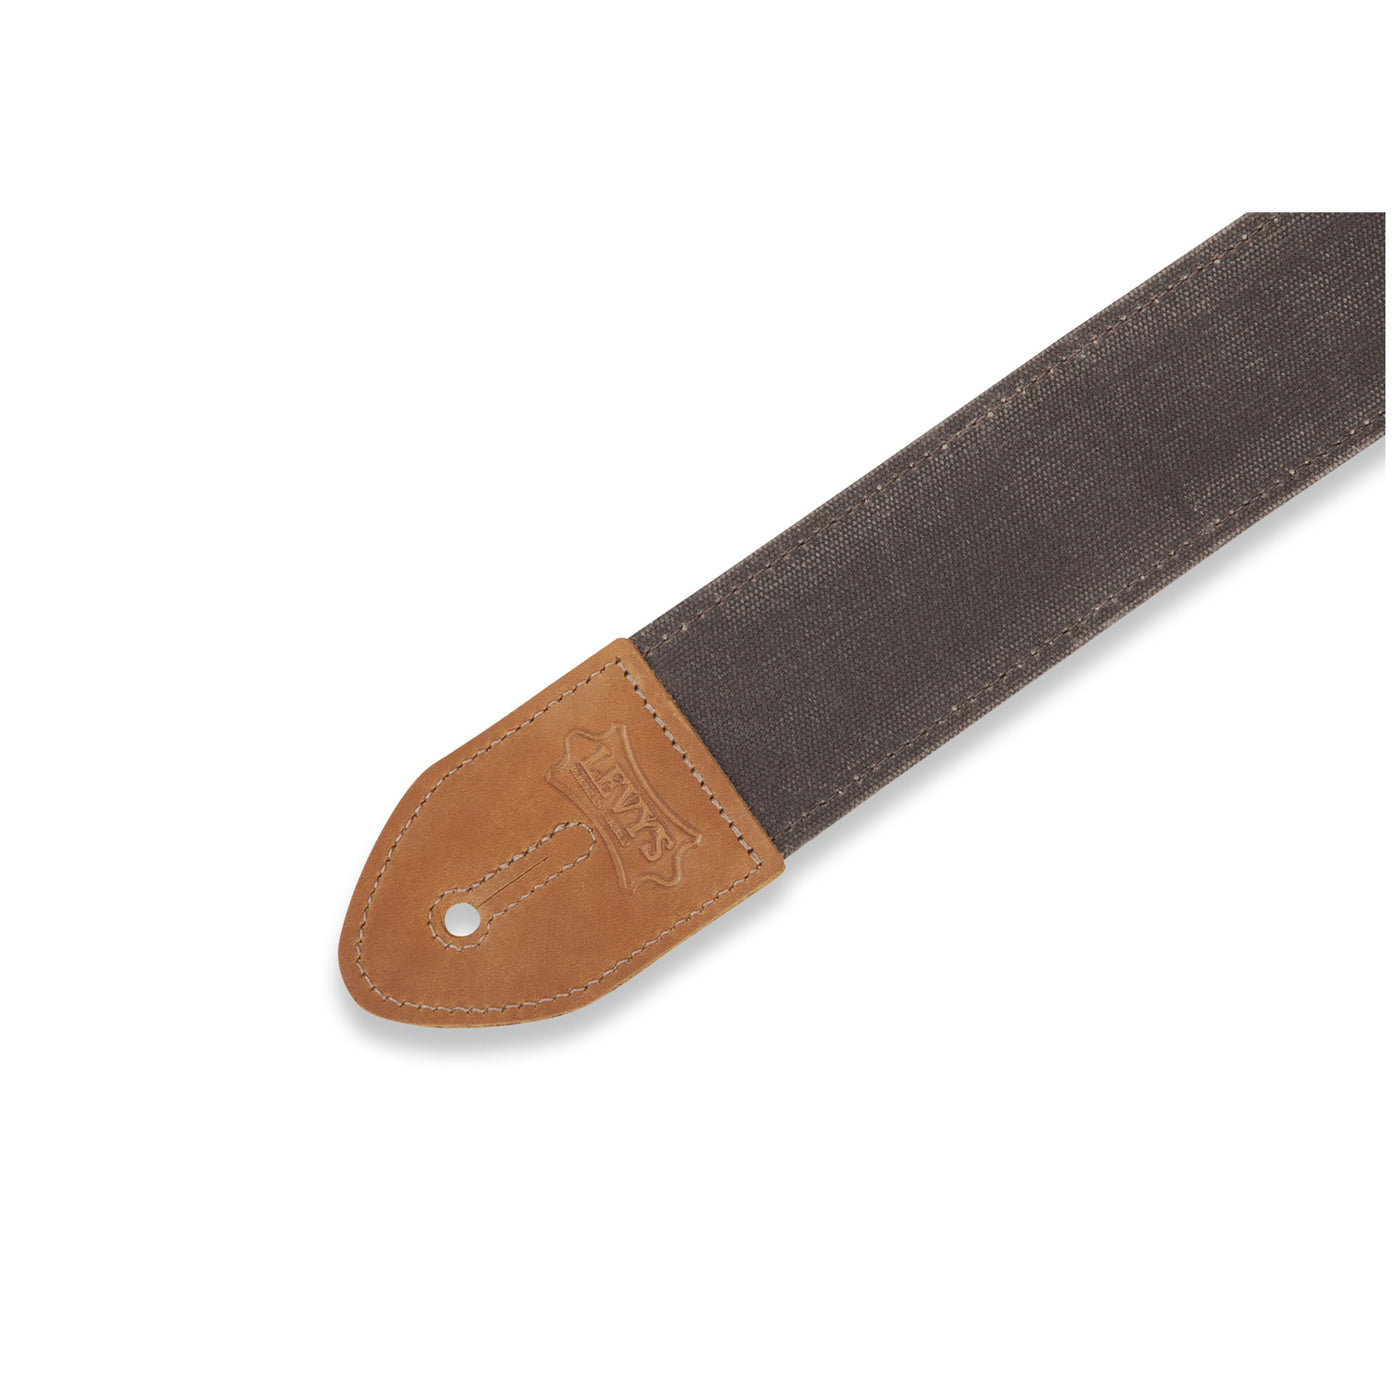 Levy's 2" Waxed Canvas Strap in Brown